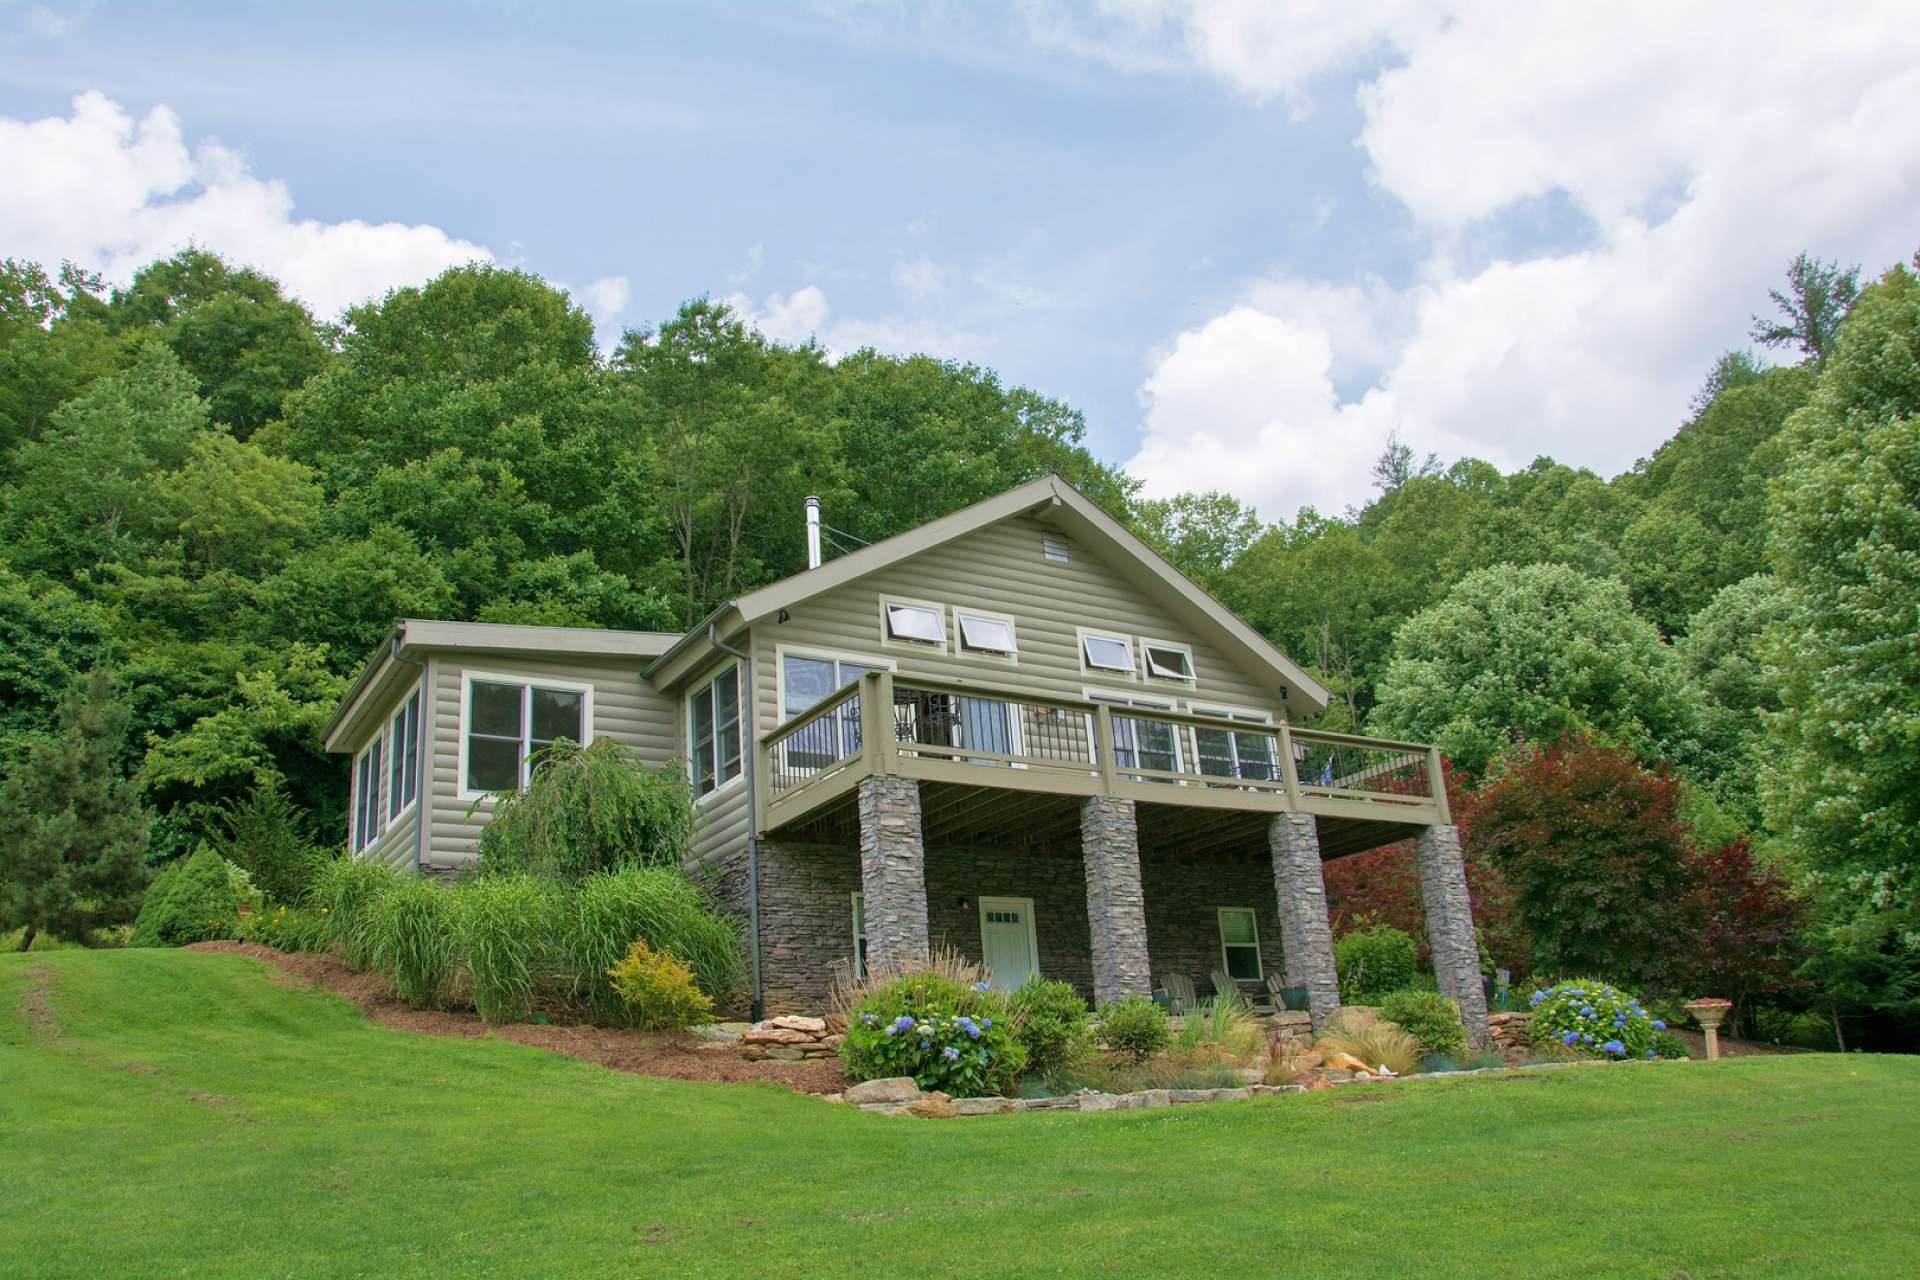 The main level offers a large open deck with plenty of room for outdoor entertaining.